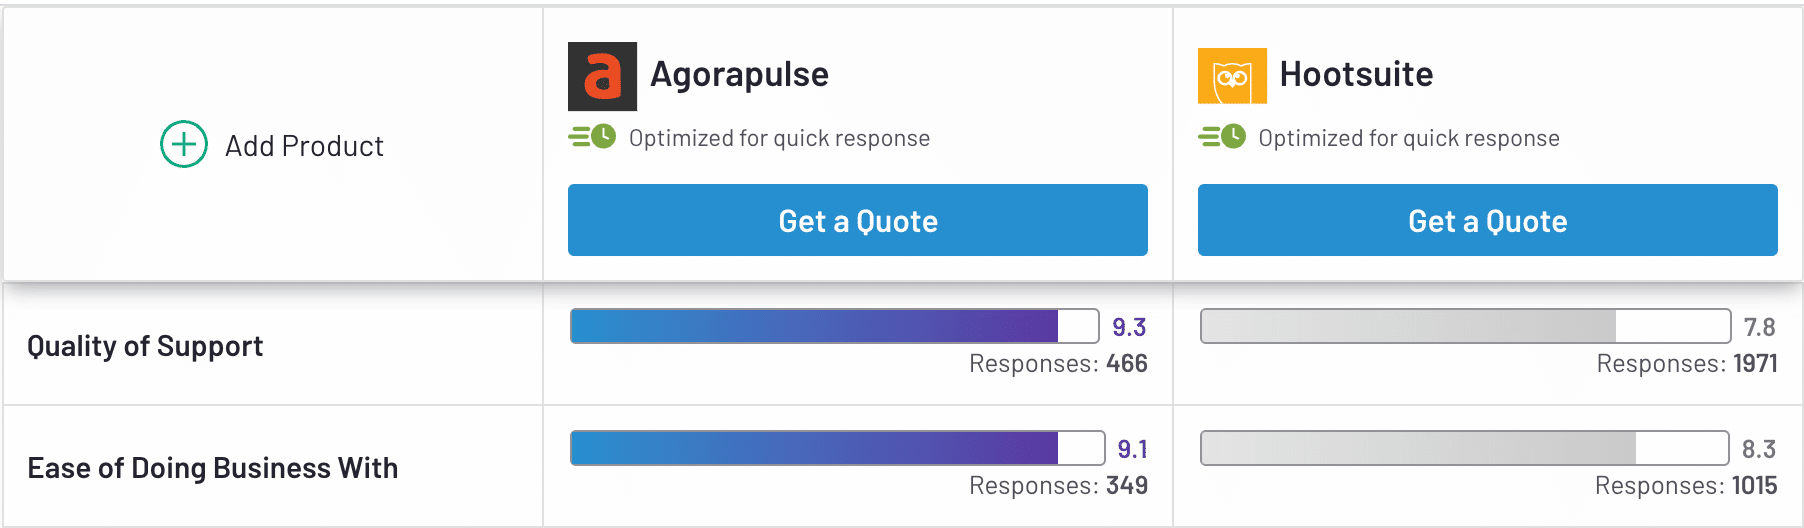 ease of doing business with agorapulse and hootsuite